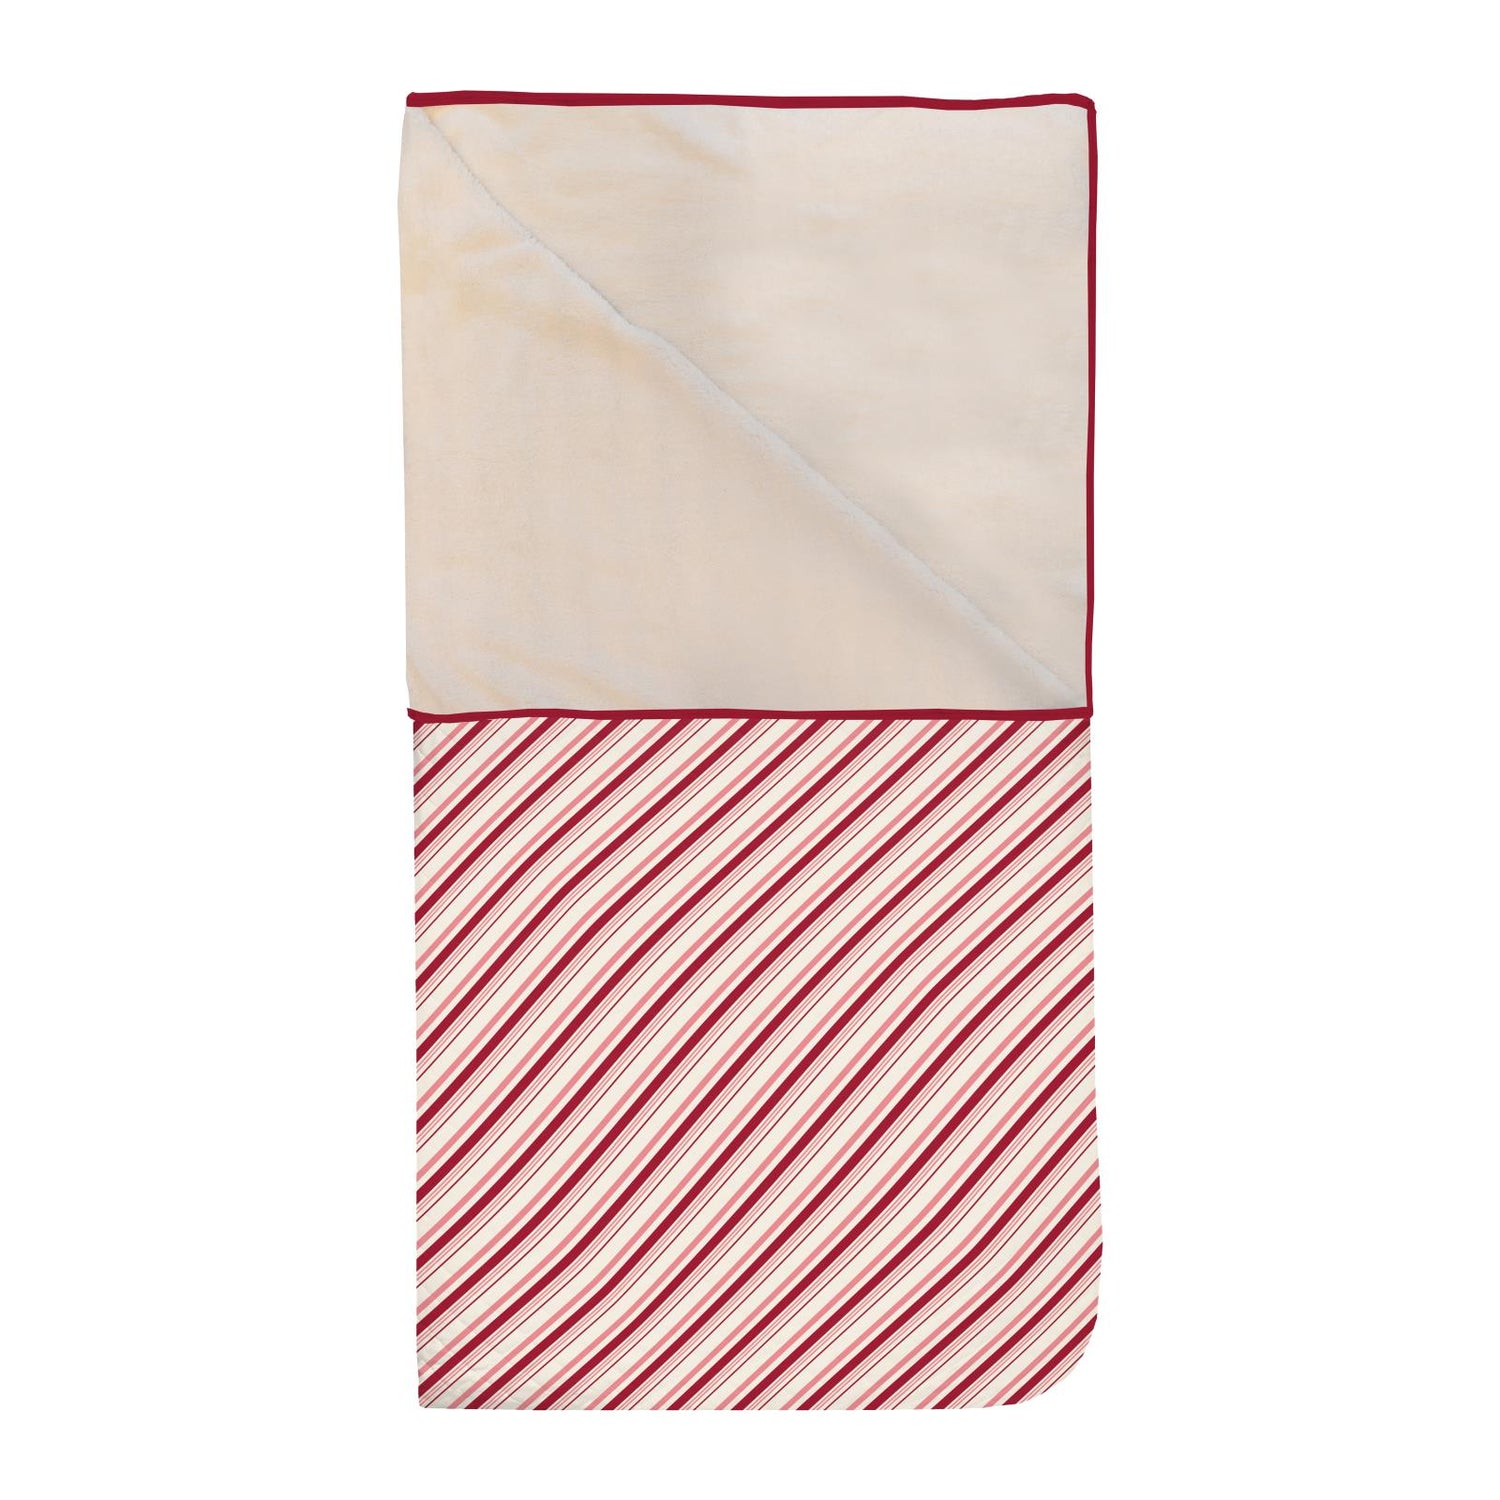 Print Sherpa-Lined Sleepover Bag in Strawberry Candy Cane Stripe